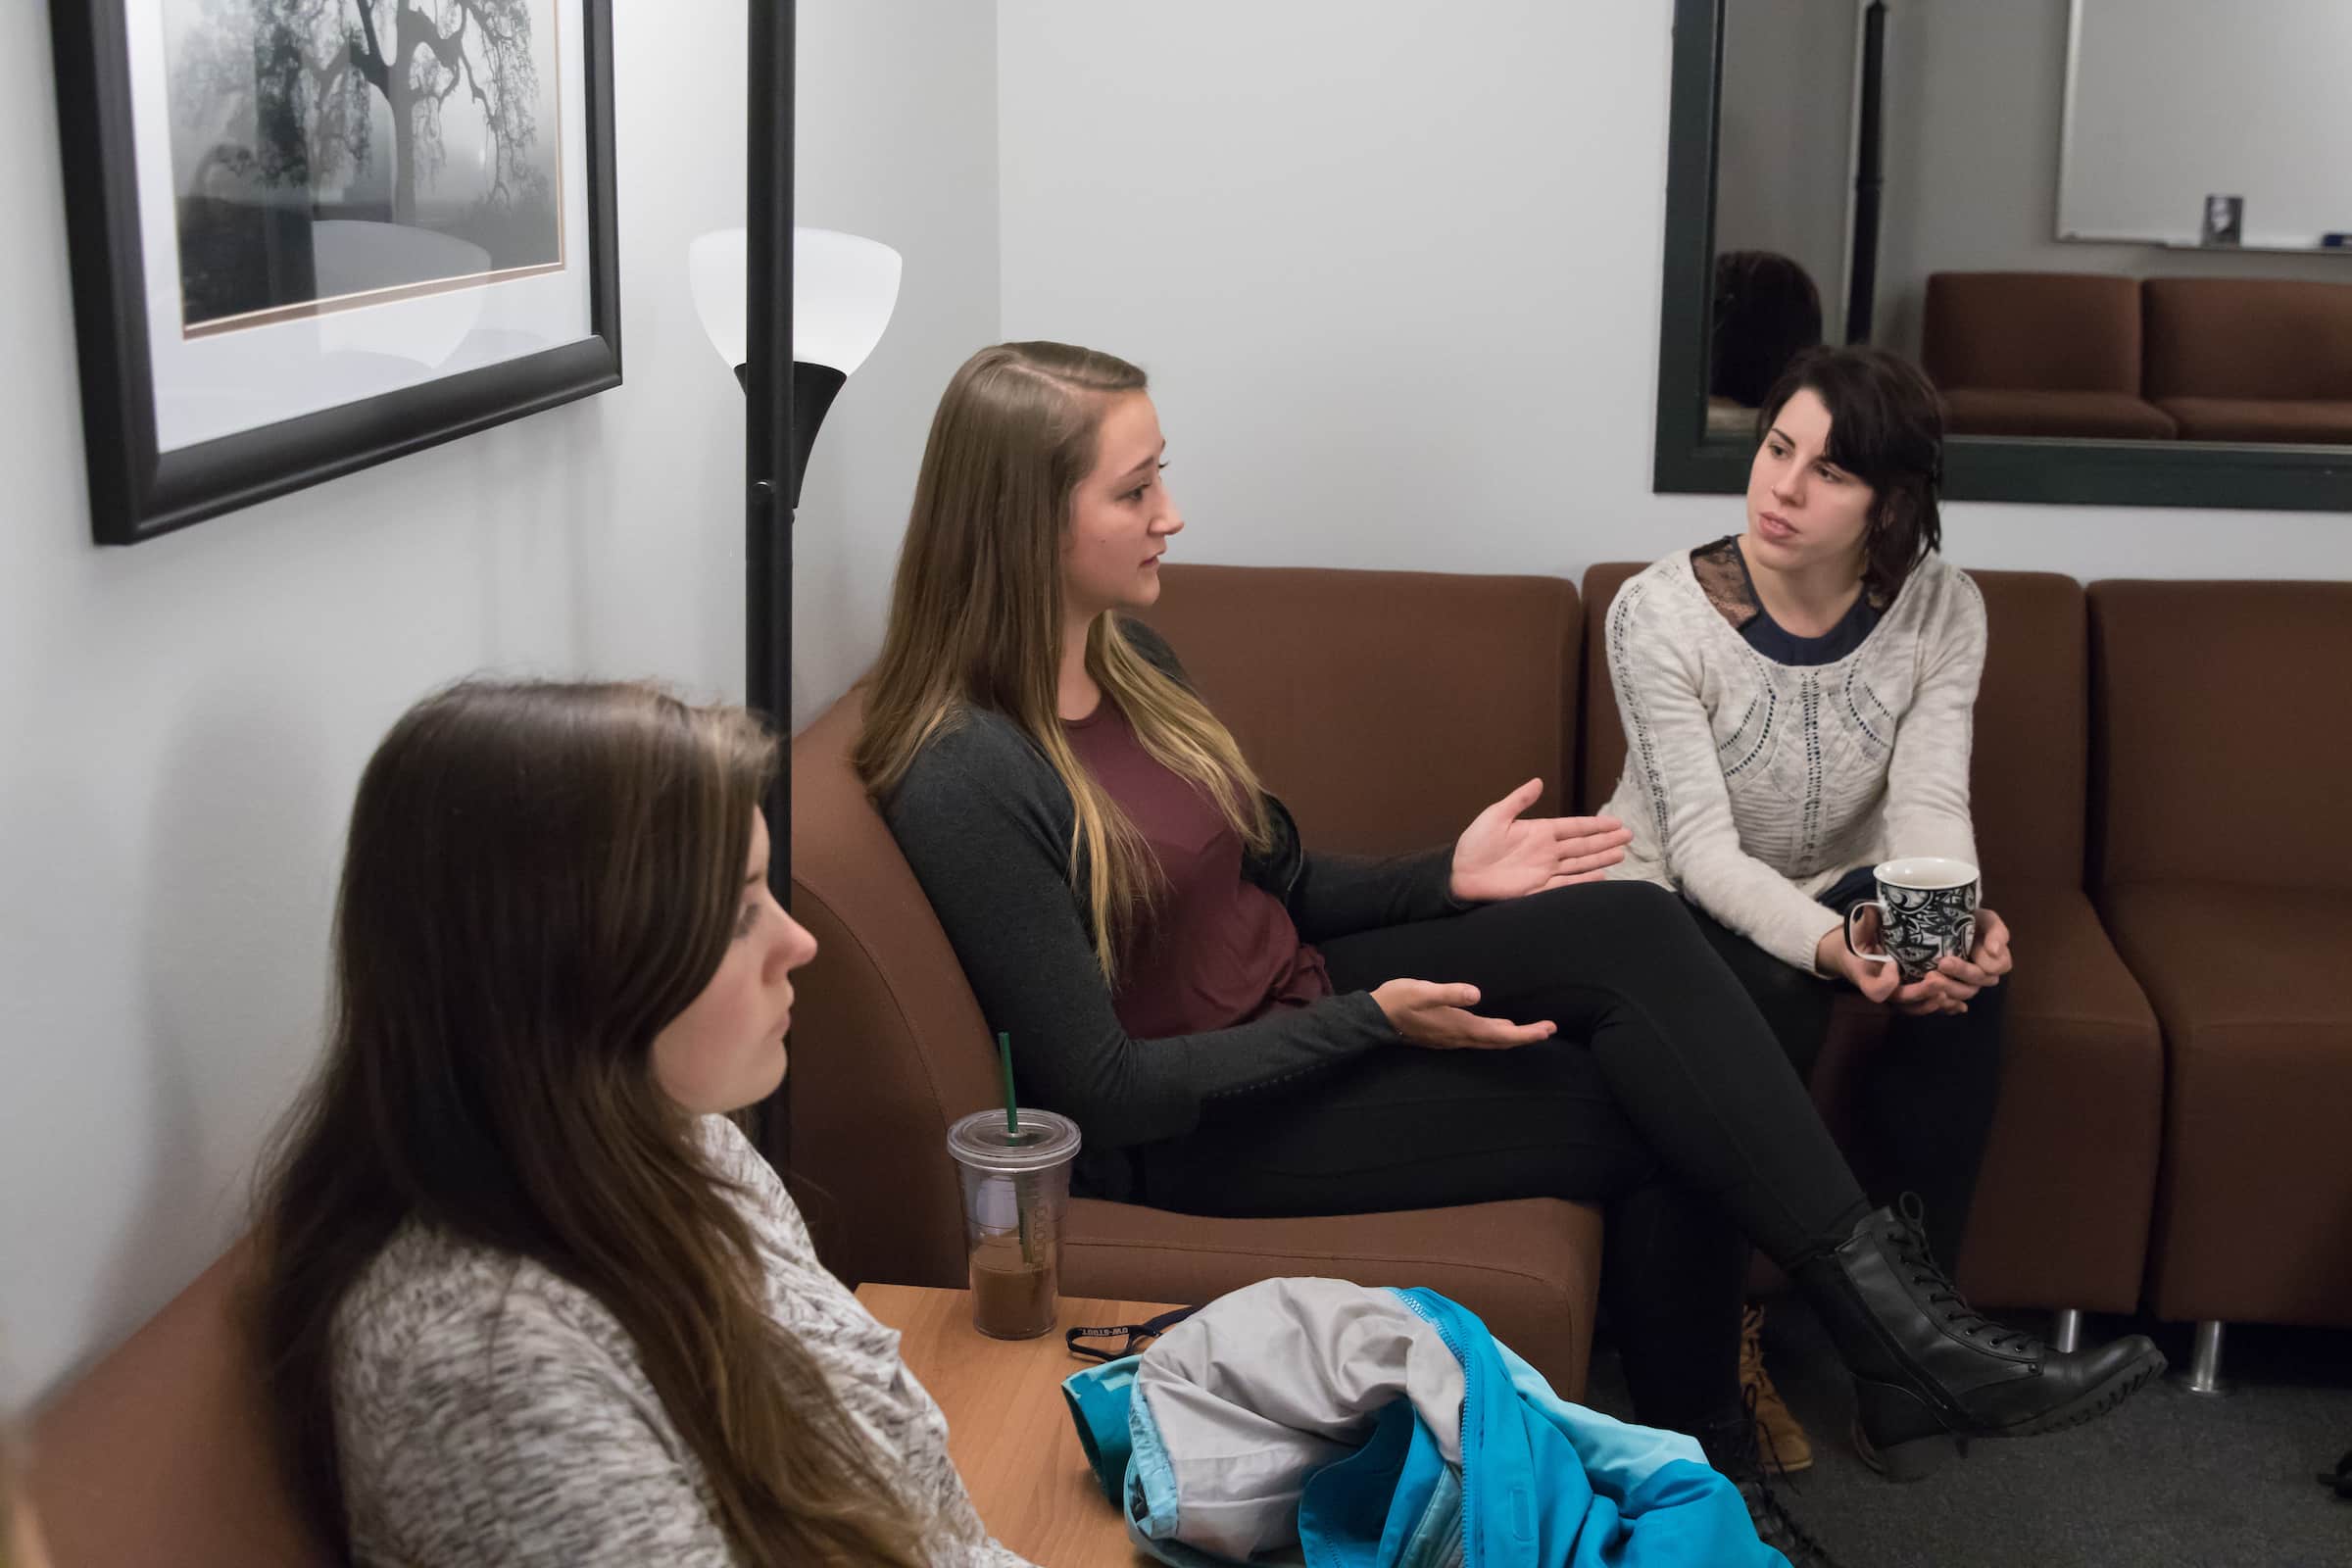 UW-Stout graduate students in the Clinical Mental Health Counseling Program, discuss their counseling sessions during Counseling Process Lab